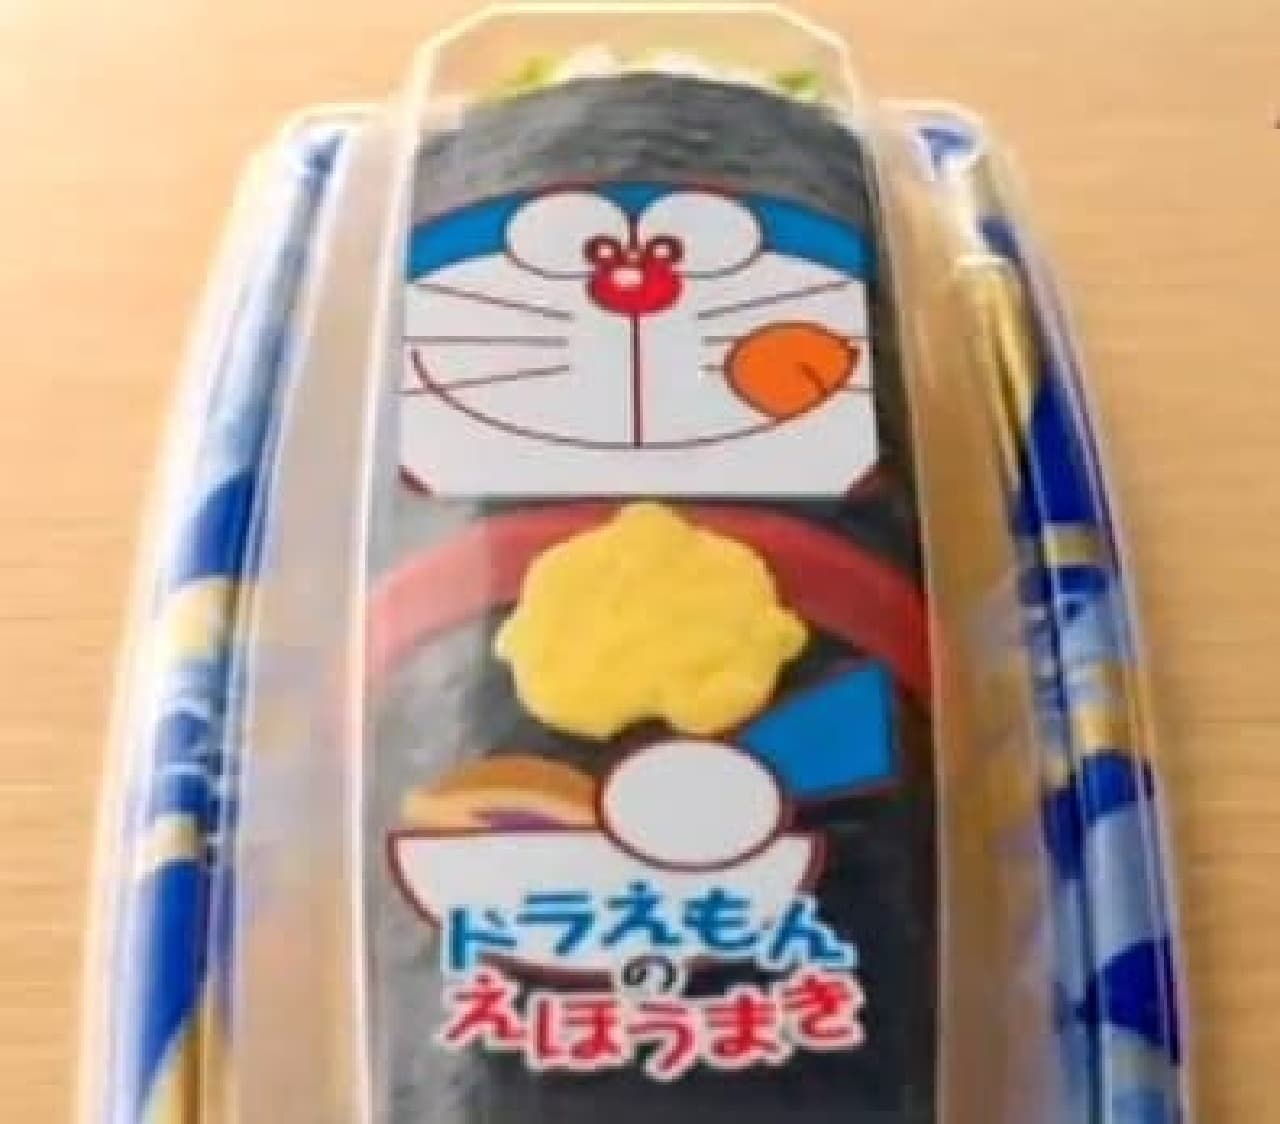 "Doraemon no Ehomaki" Doraemon is included in the package!